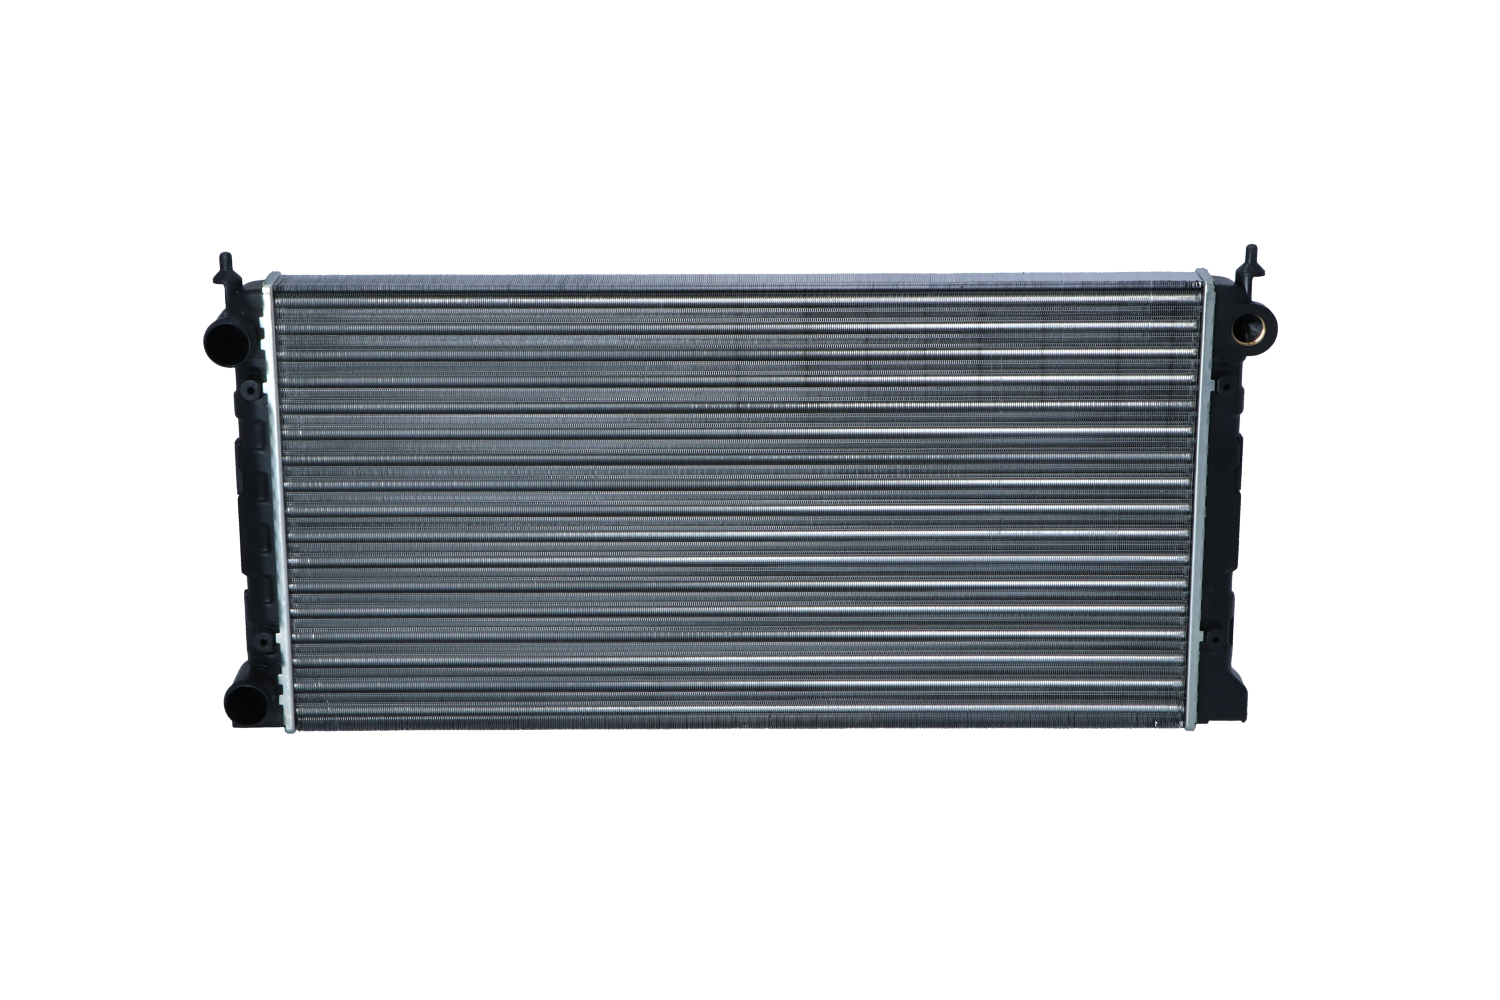 NRF Aluminium, 630 x 322 x 34 mm, Mechanically jointed cooling fins Radiator 509506 buy